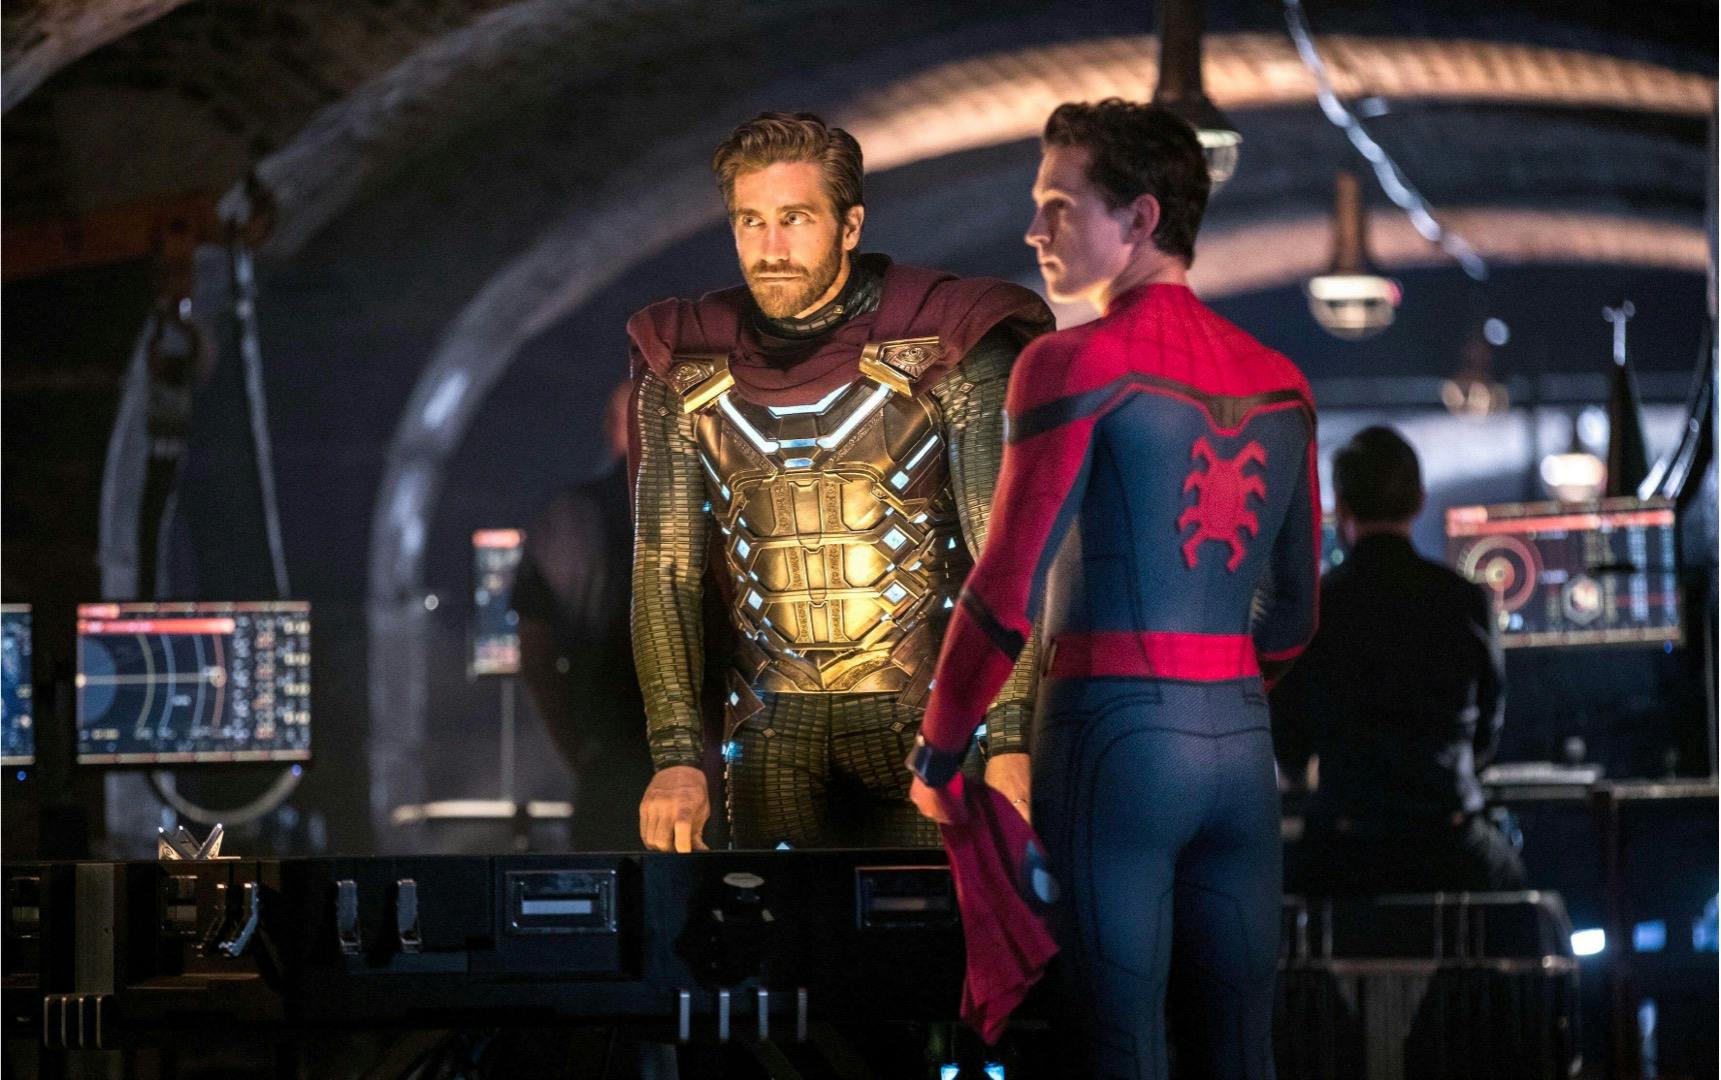 Quentin Beck a.k.a. Mysterio (Jake Gyllenhaal) and Peter Parker a.k.a. Spider-Man (Tom Holland) in Spider-Man: Far from Home (2019). Gyllenhaal wears a gold suit and Holland wears a red and blue suit.